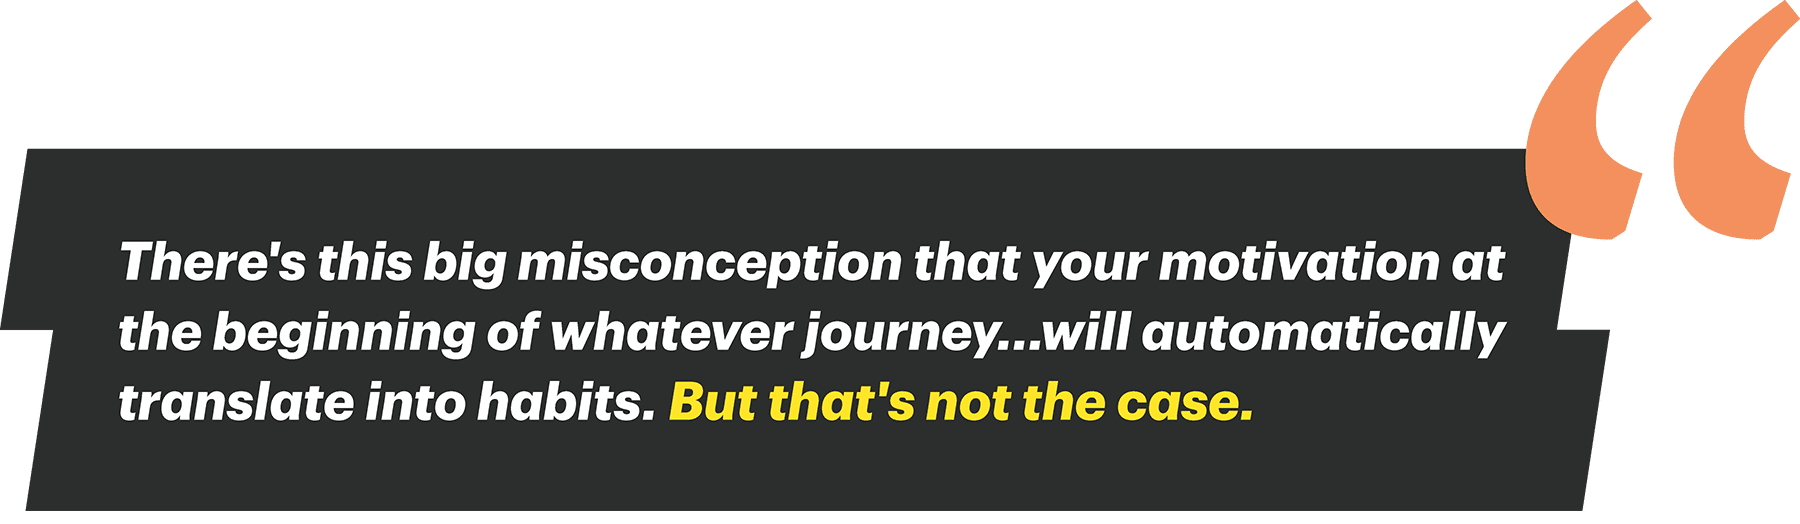 There's this big misconception that your motivation at the beginning of whatever journey…will automatically translate into habits. But that's not the case.